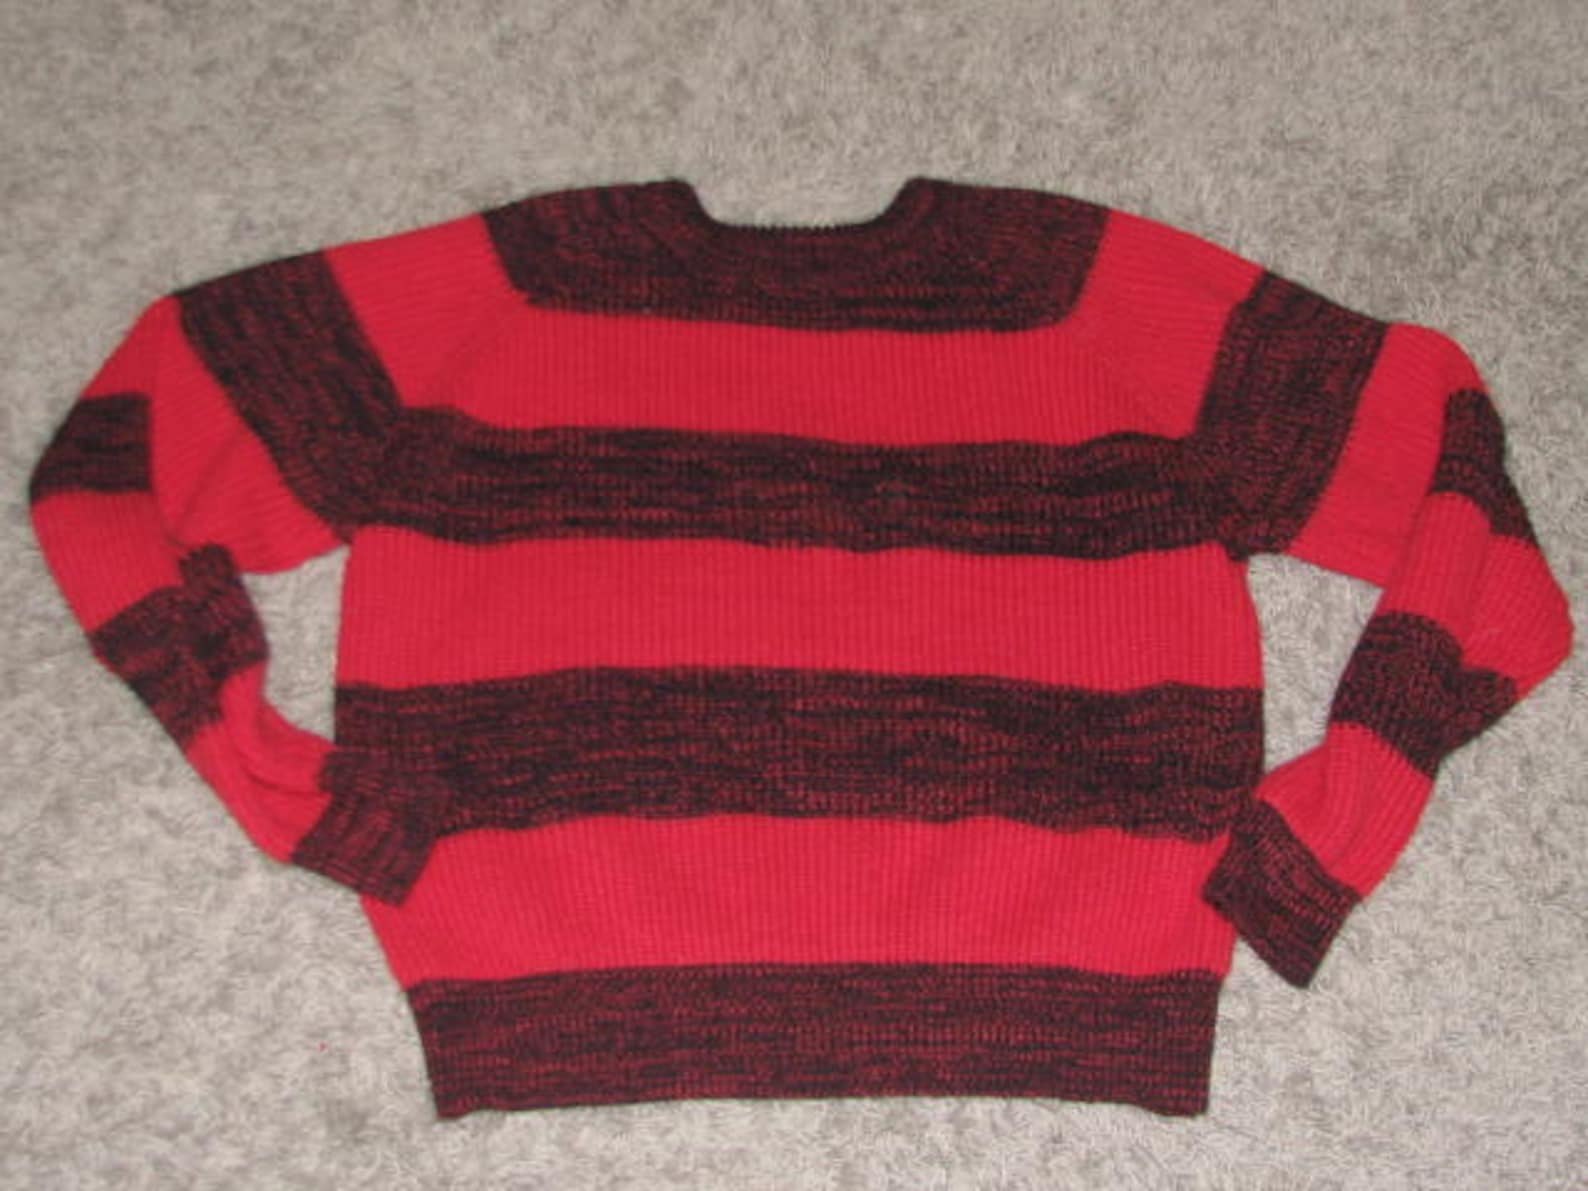 90's KURT Cobain STRIPED Sweater // Red and Black Knit | Etsy